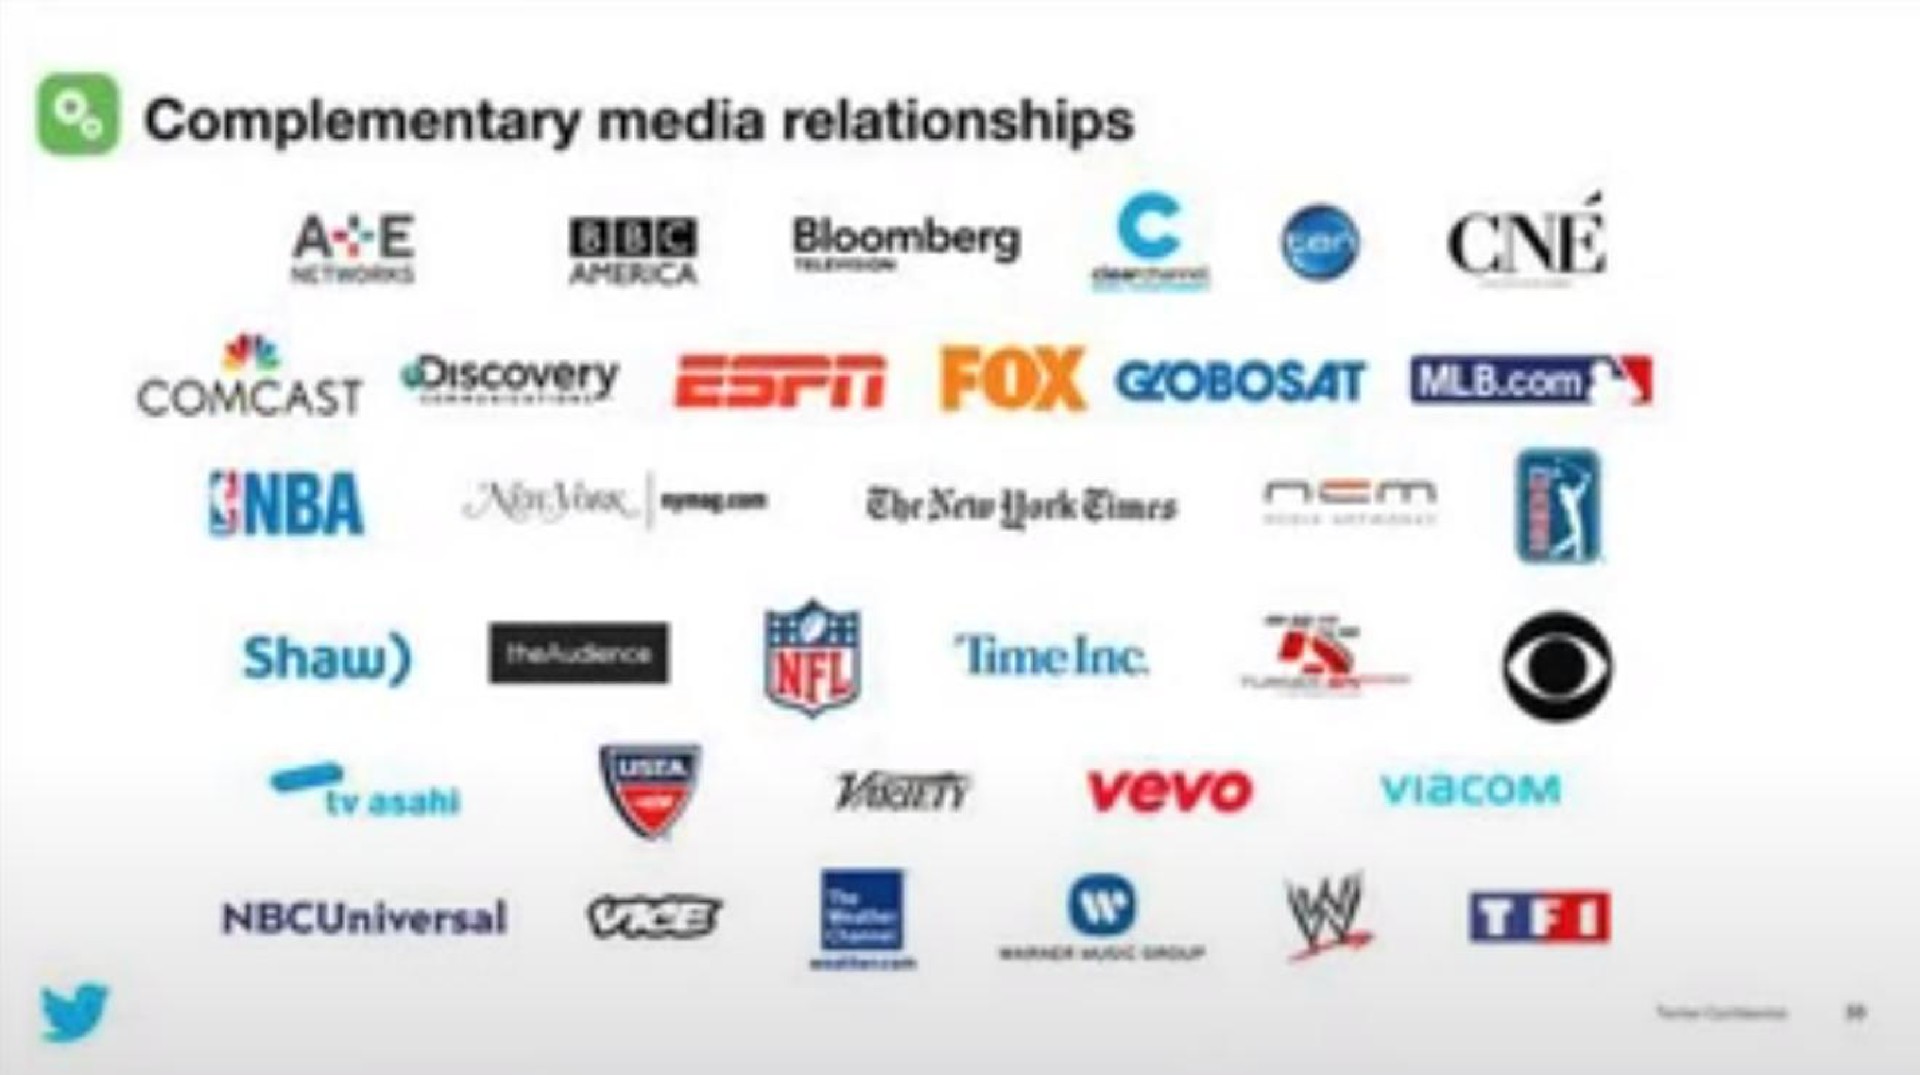 complementary media relationships sri fox tenne tort shaw at | Twitter